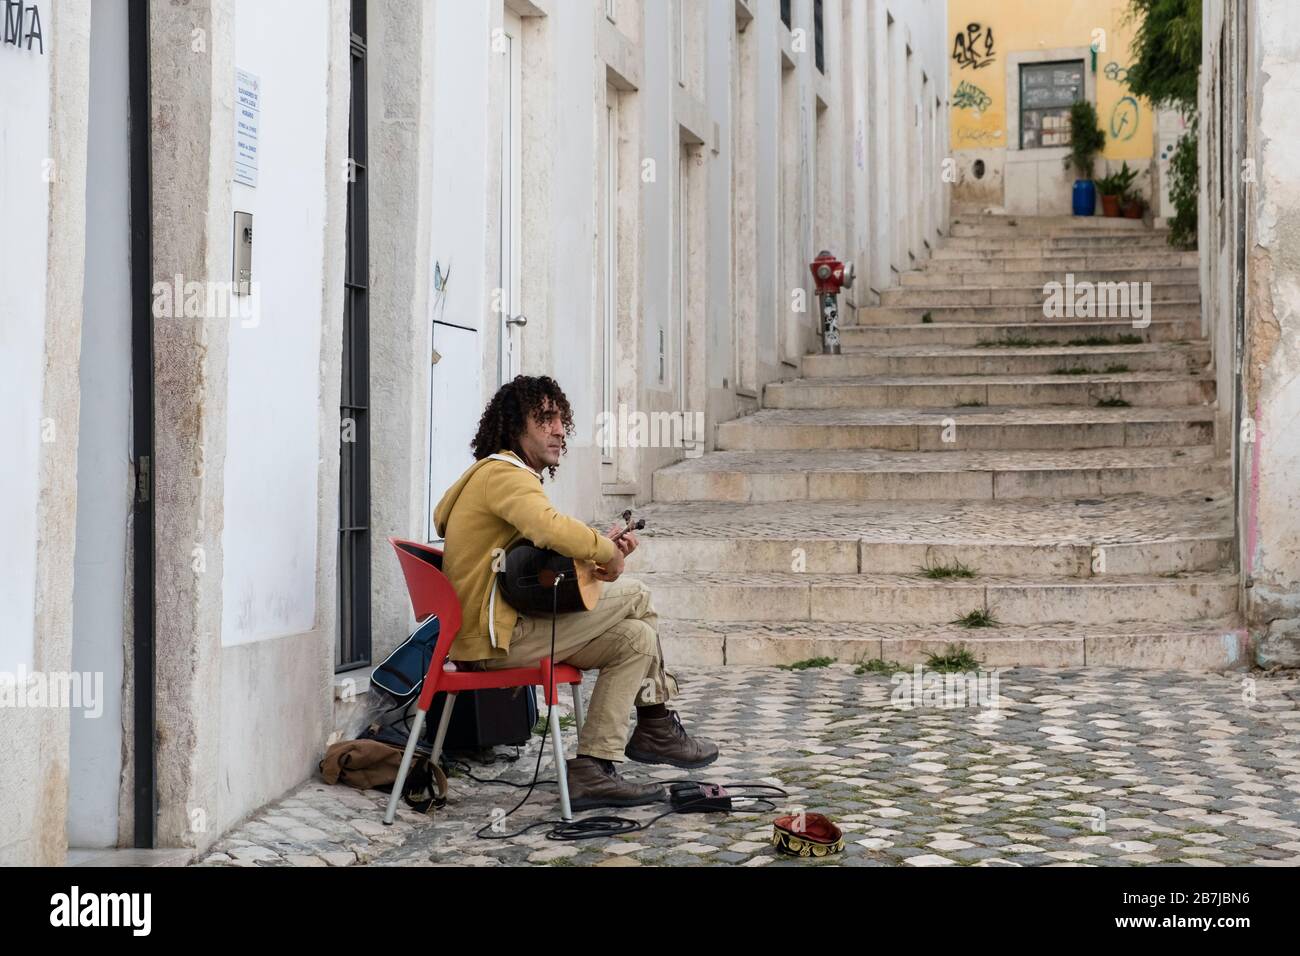 Street musician in Alfama district, playing traditional Portuguese fado guitar, Lisbon, Portugal Stock Photo